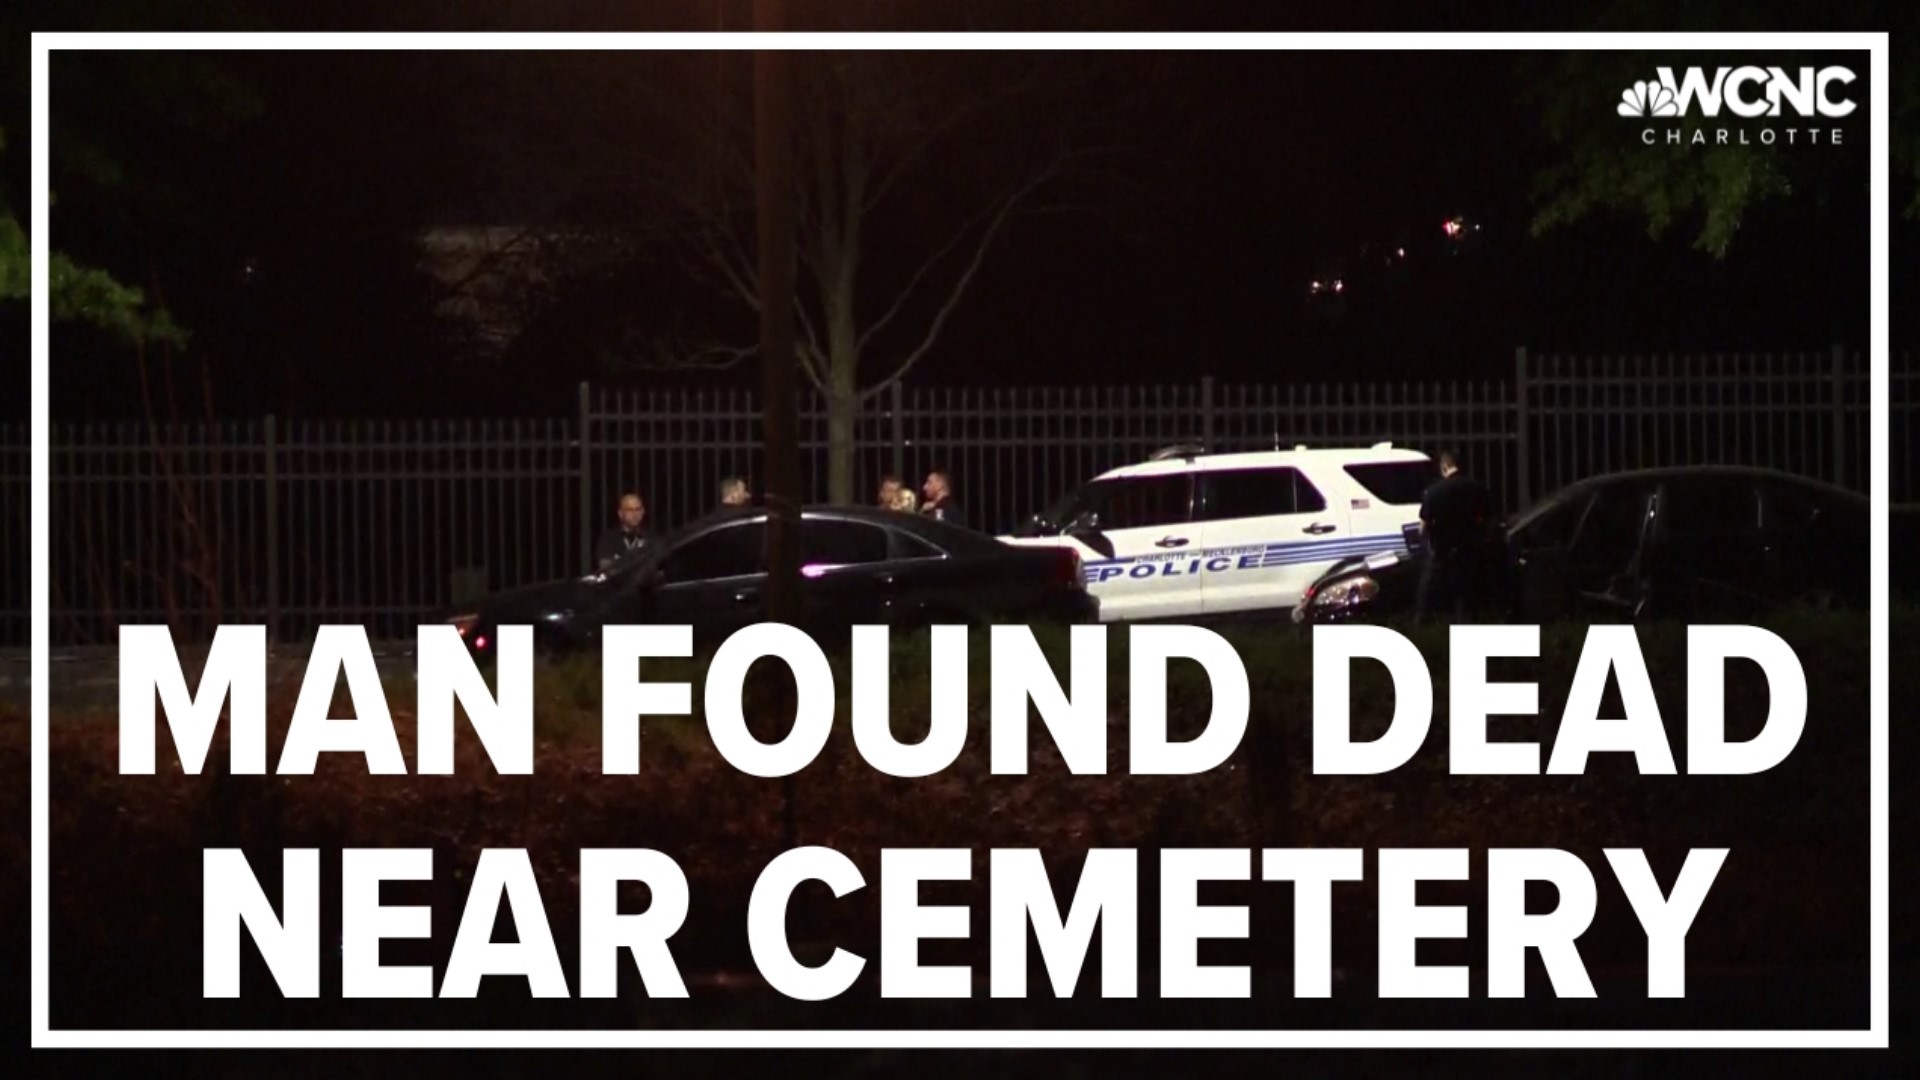 During a news briefing, CMPD said a person saw the man lying in the field near the cemetery and went out to check on him.